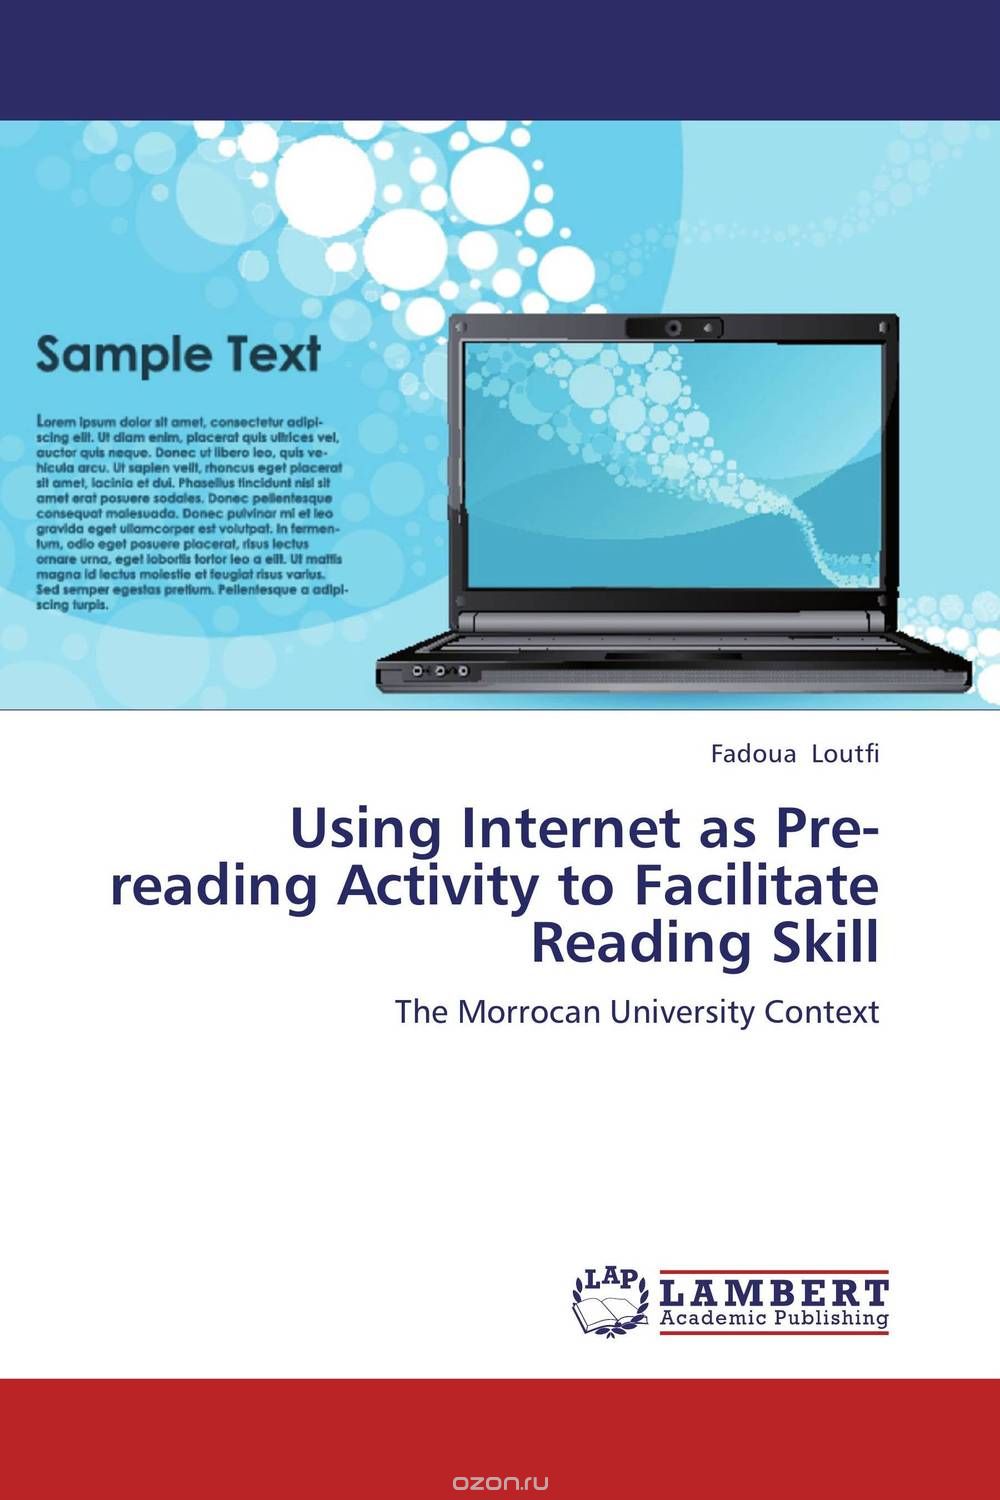 Using Internet as Pre-reading Activity to Facilitate Reading Skill